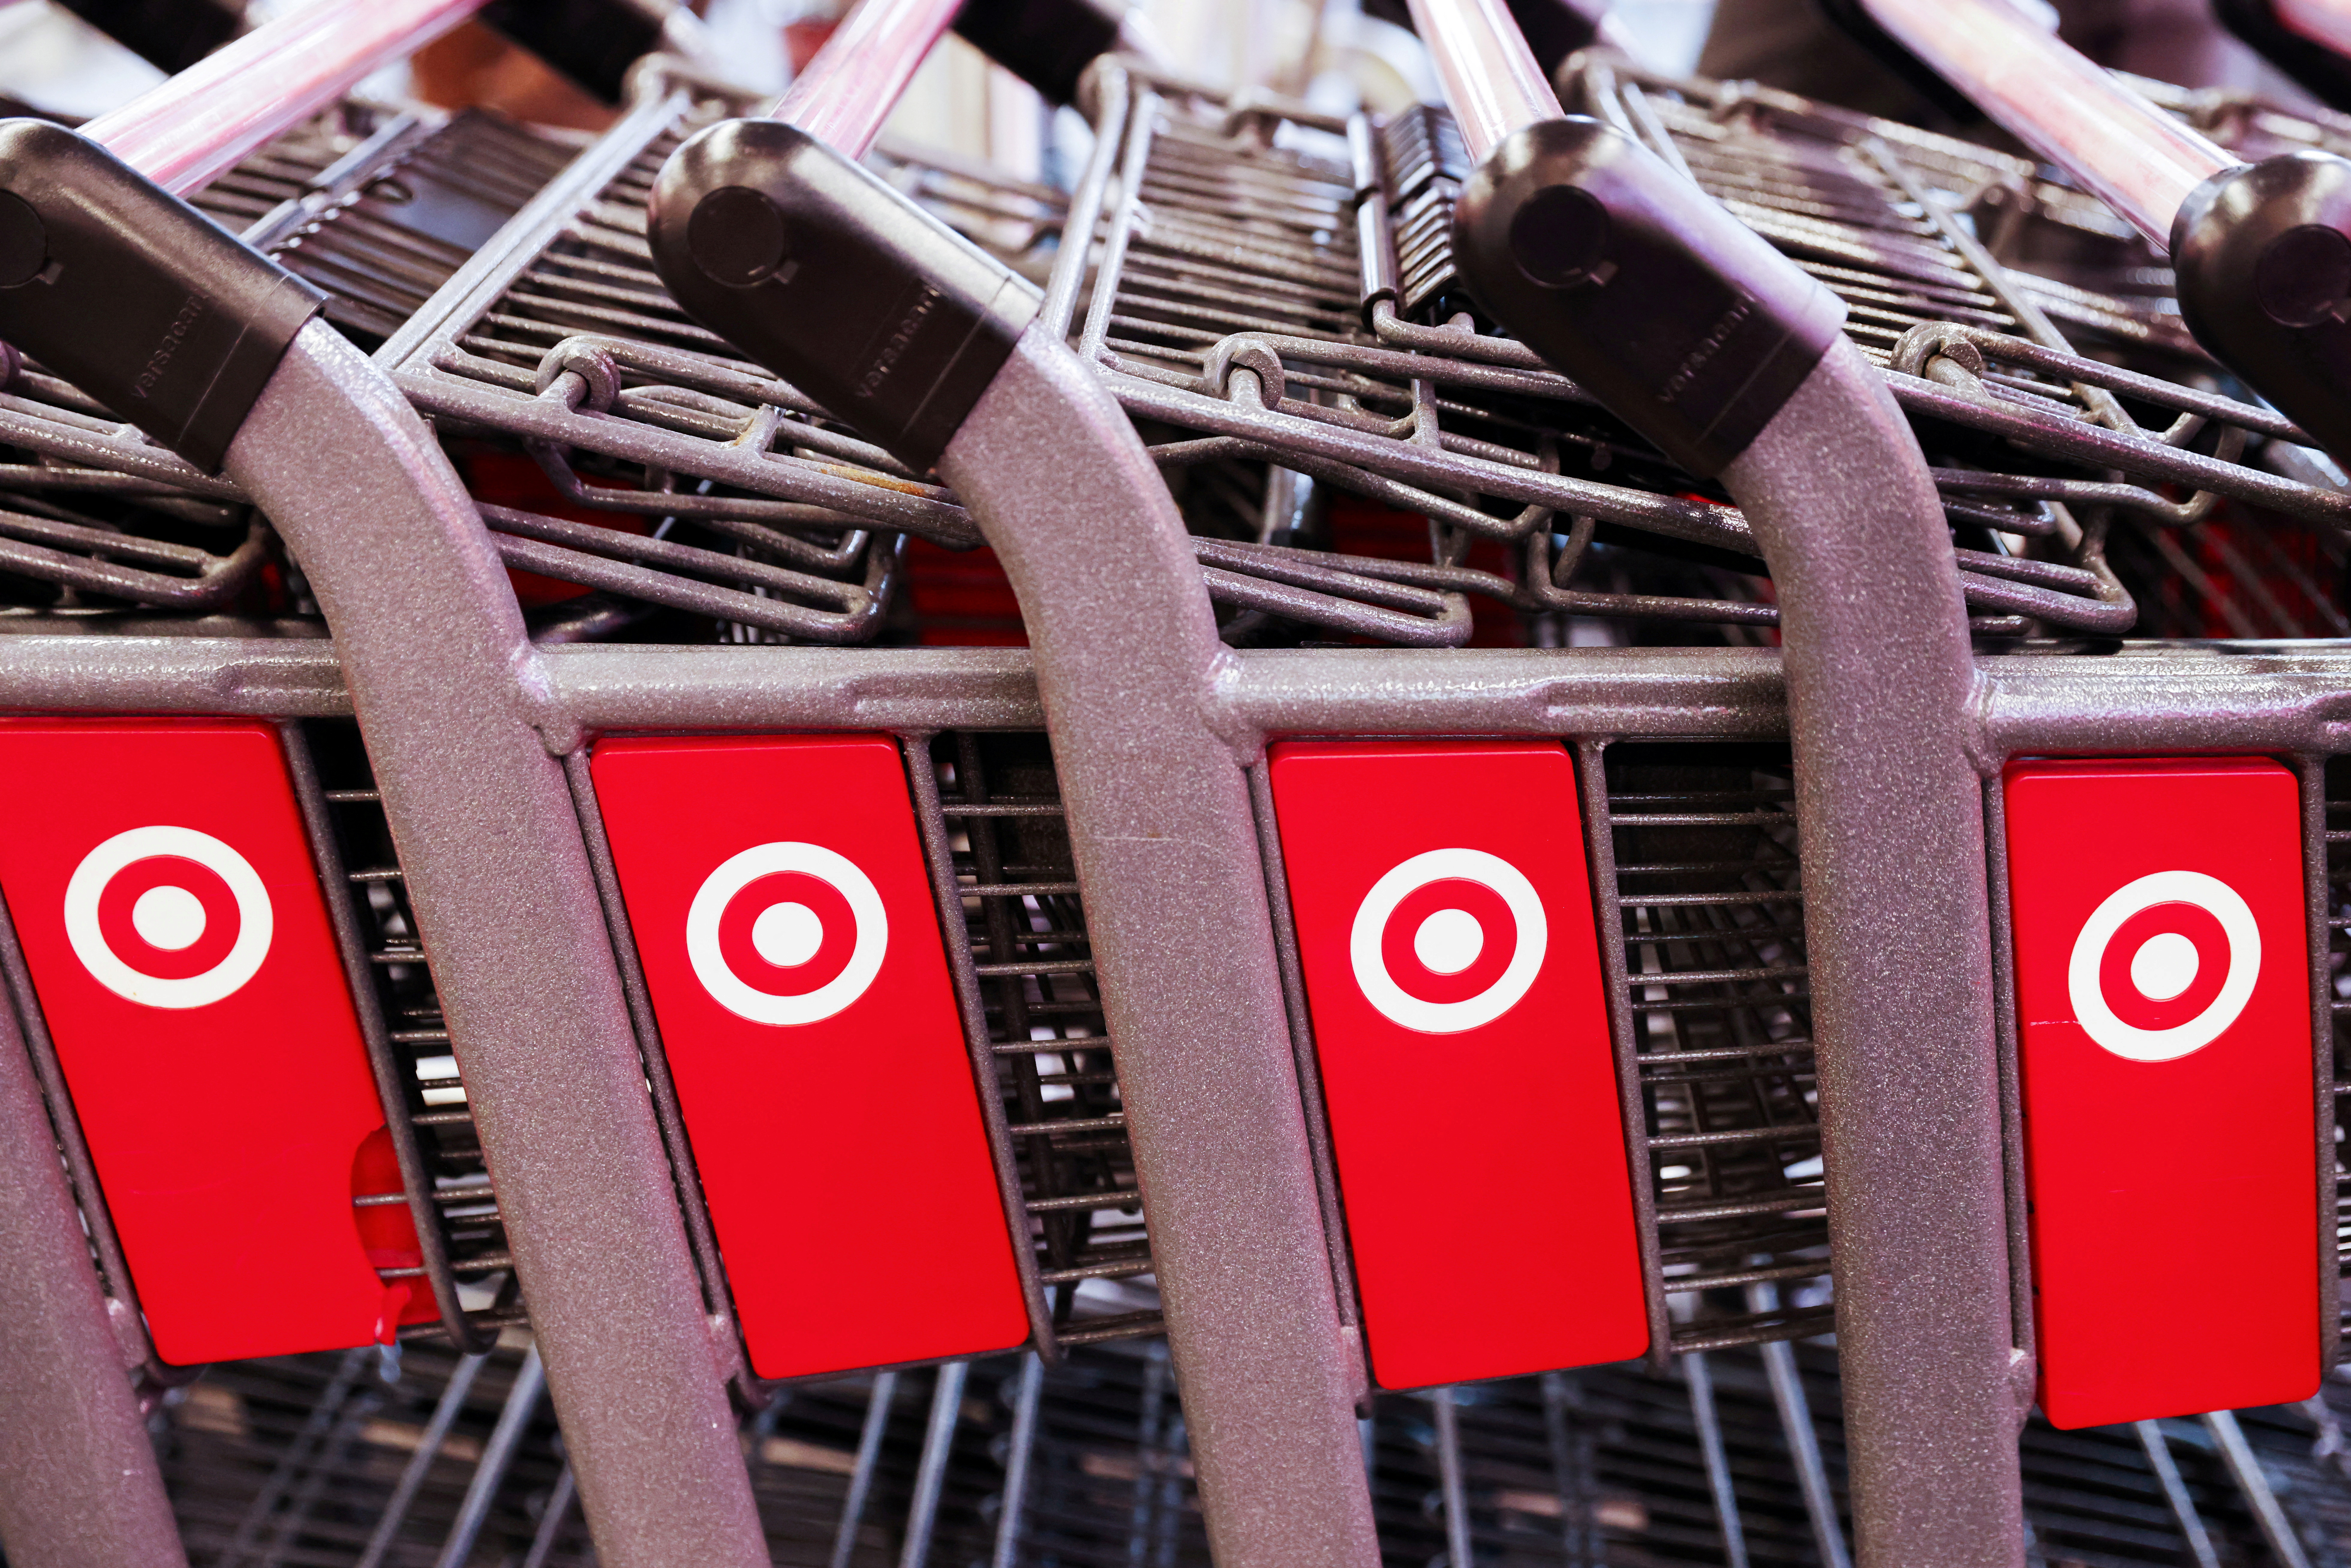 A Target logo is seen on shopping carts at a Target store in Manhattan, New York City